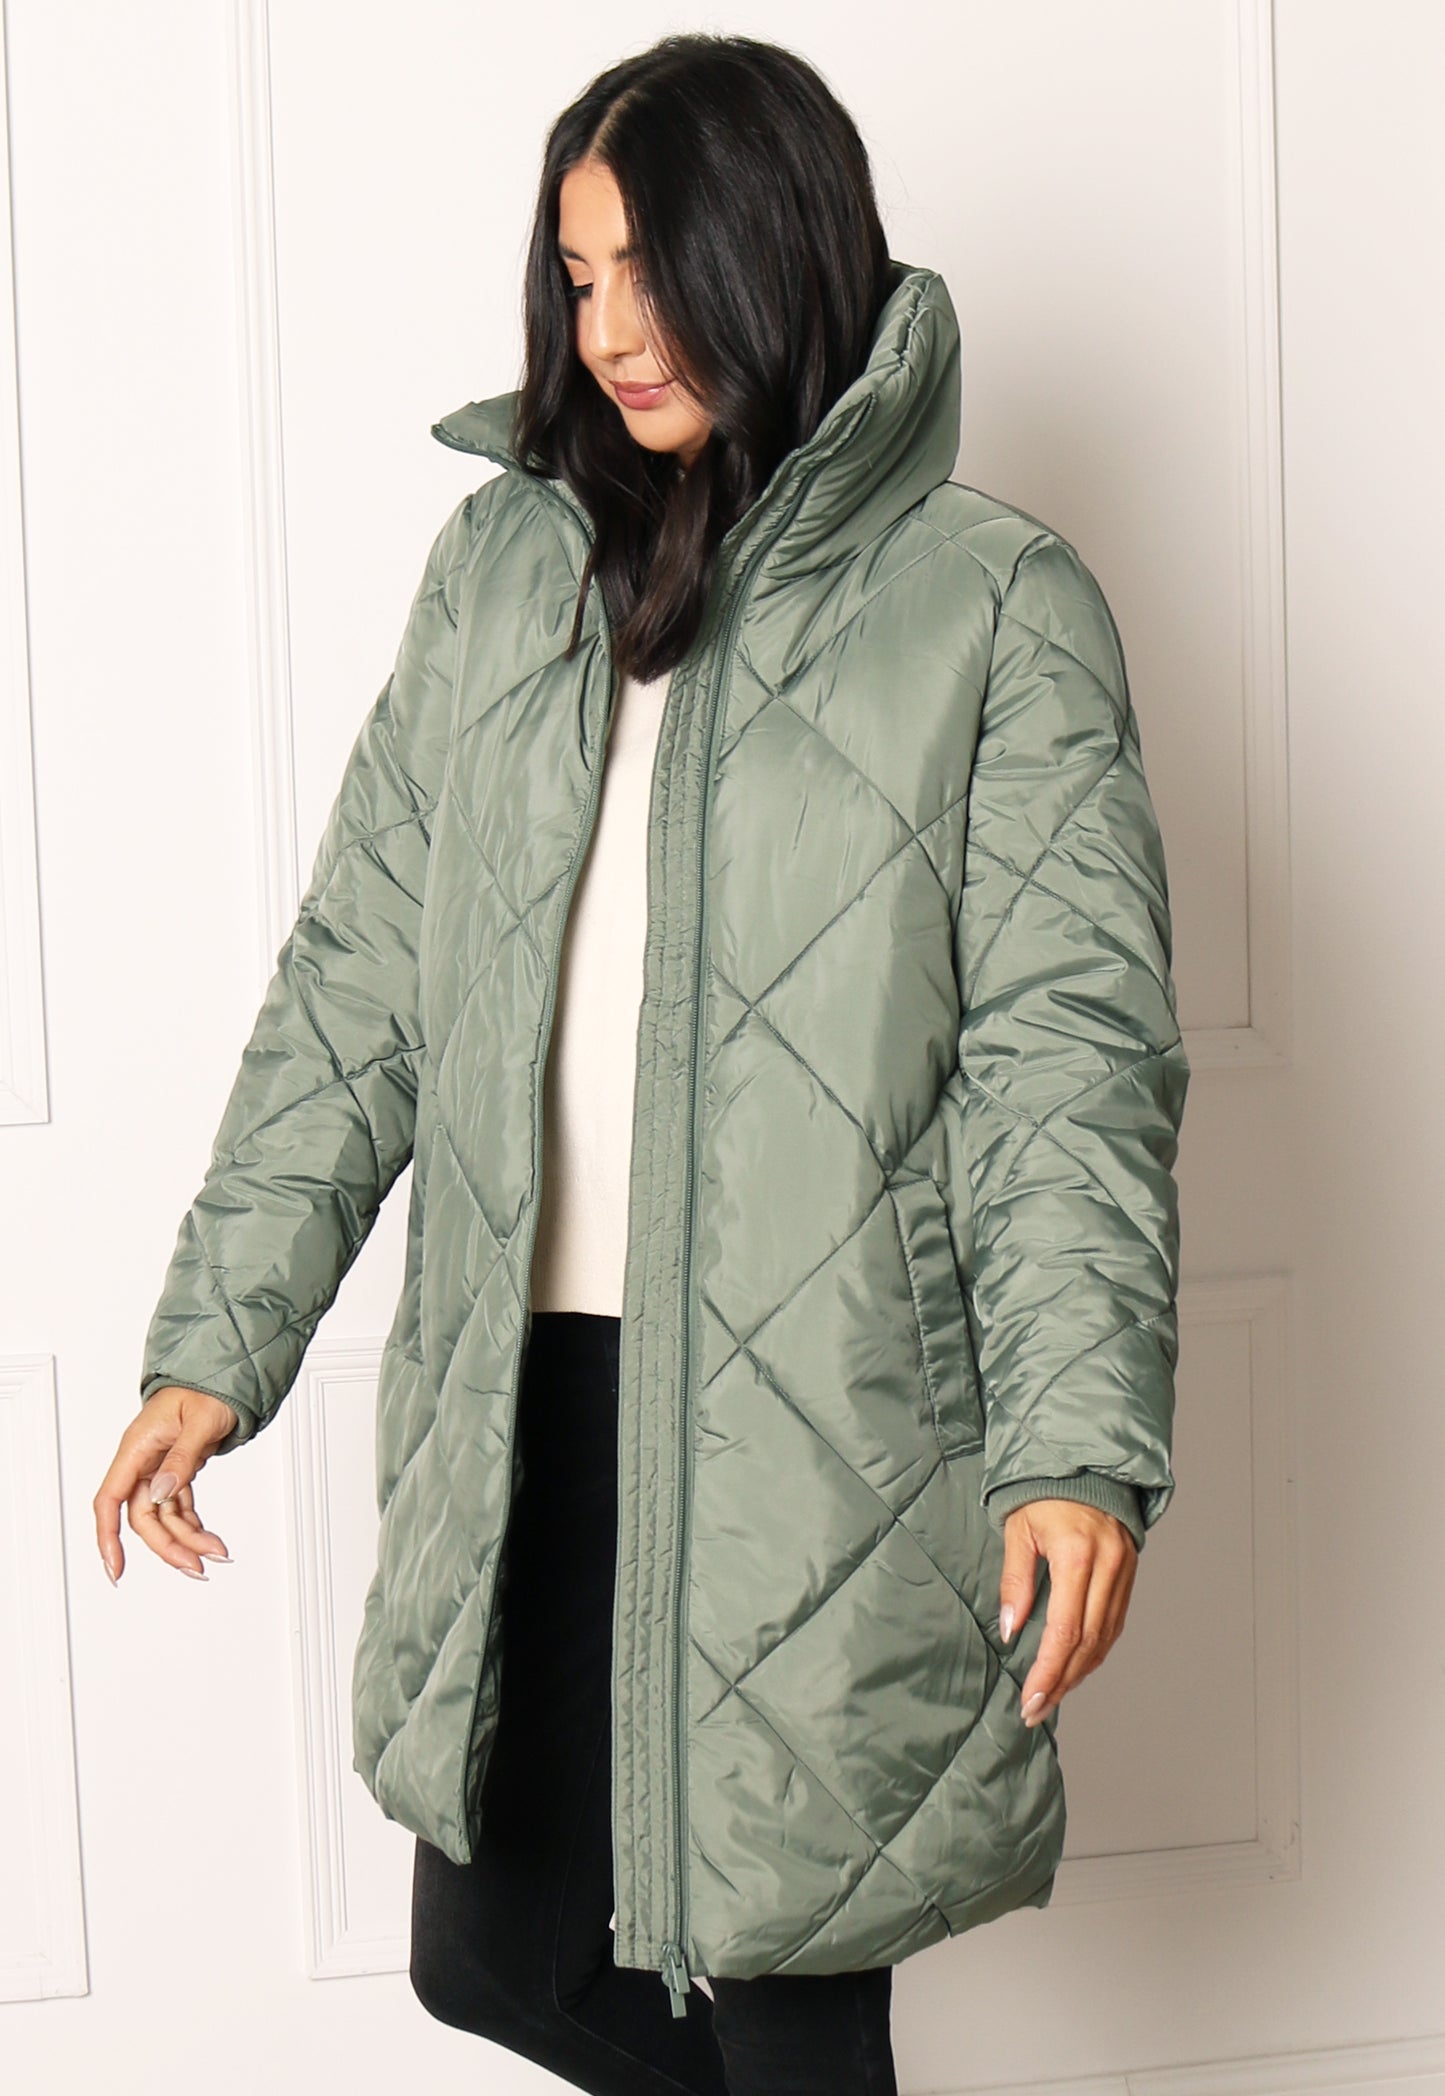 VILA Adaya Diamond Quilted Longline Puffer Coat with Funnel Neck in Soft Green - concretebartops